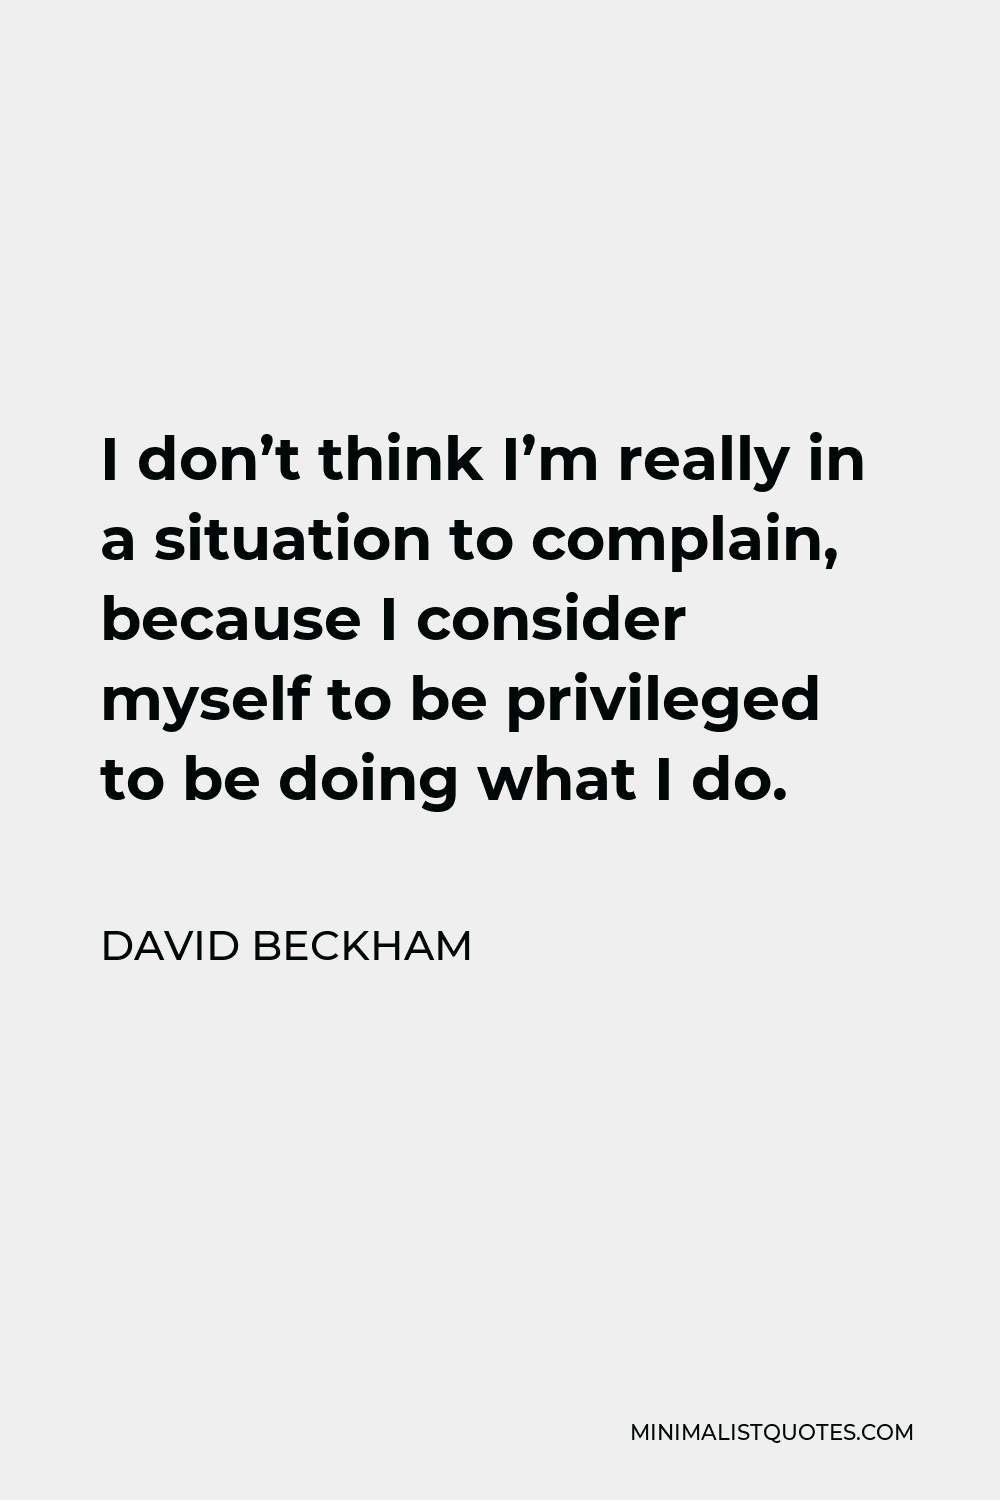 David Beckham Quote - I don’t think I’m really in a situation to complain, because I consider myself to be privileged to be doing what I do.